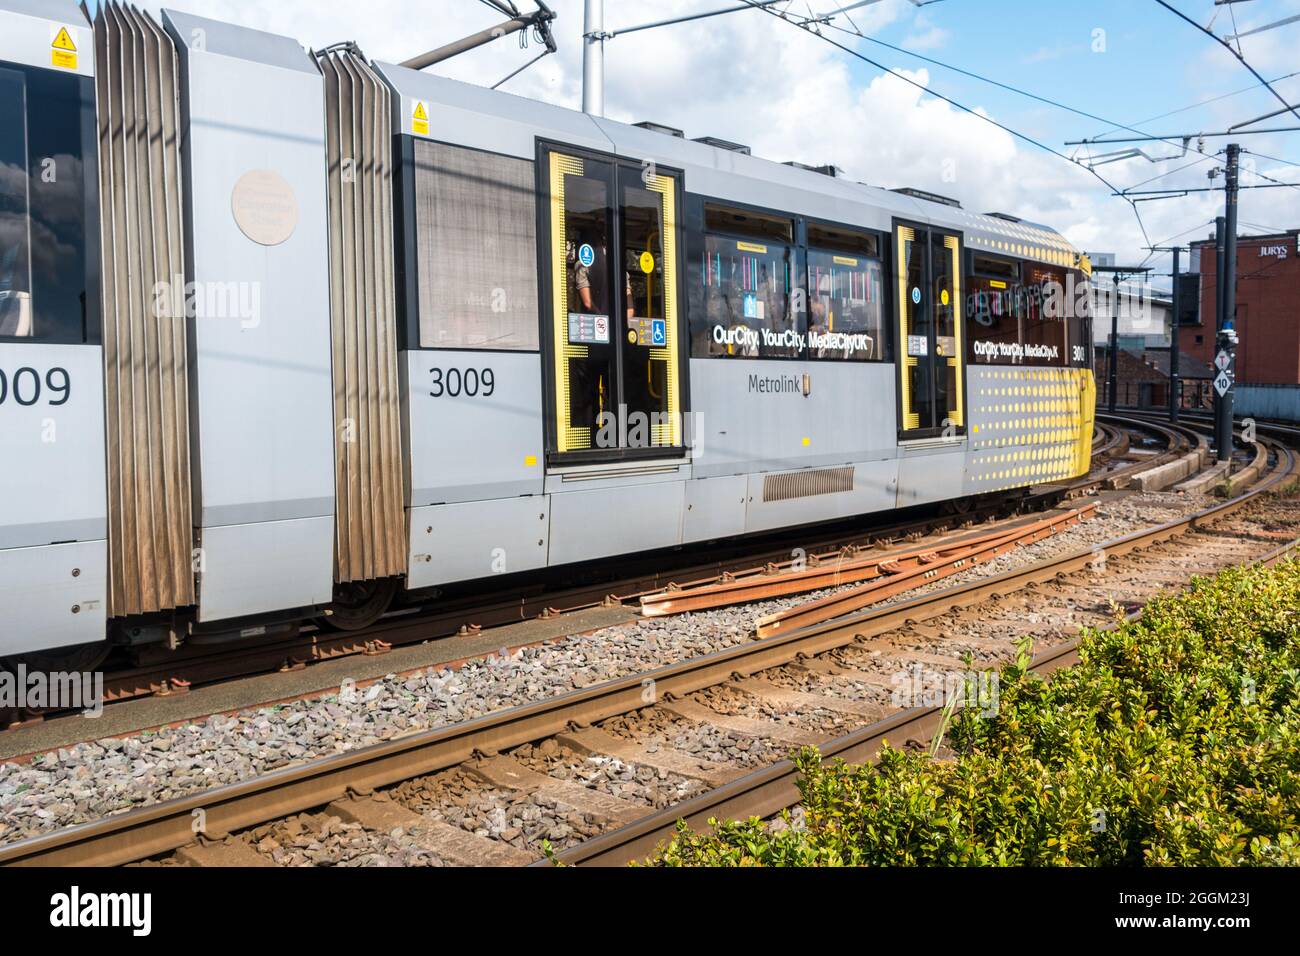 Metrolink Manchester yellow tram as part of Transport for Greater Manchester  connecting the city and urban areas around Stock Photo - Alamy